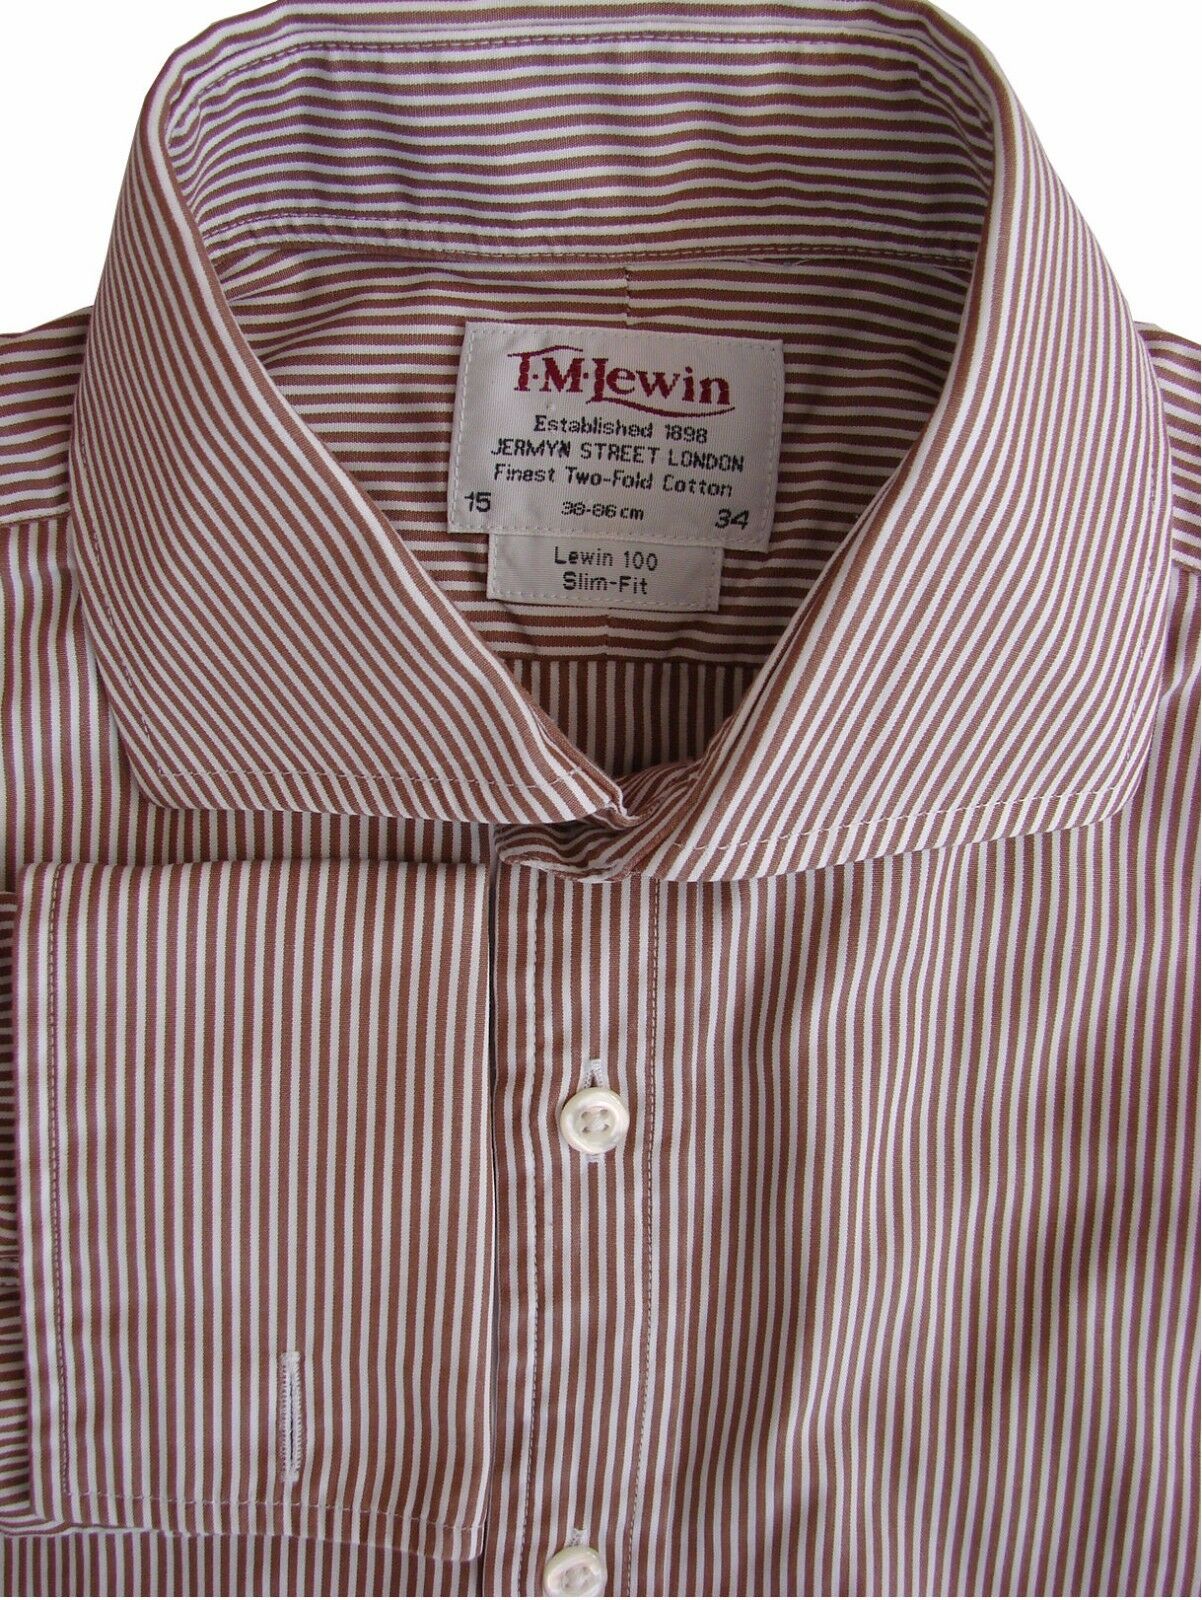 T.M.Lewin Down Shirts for Men